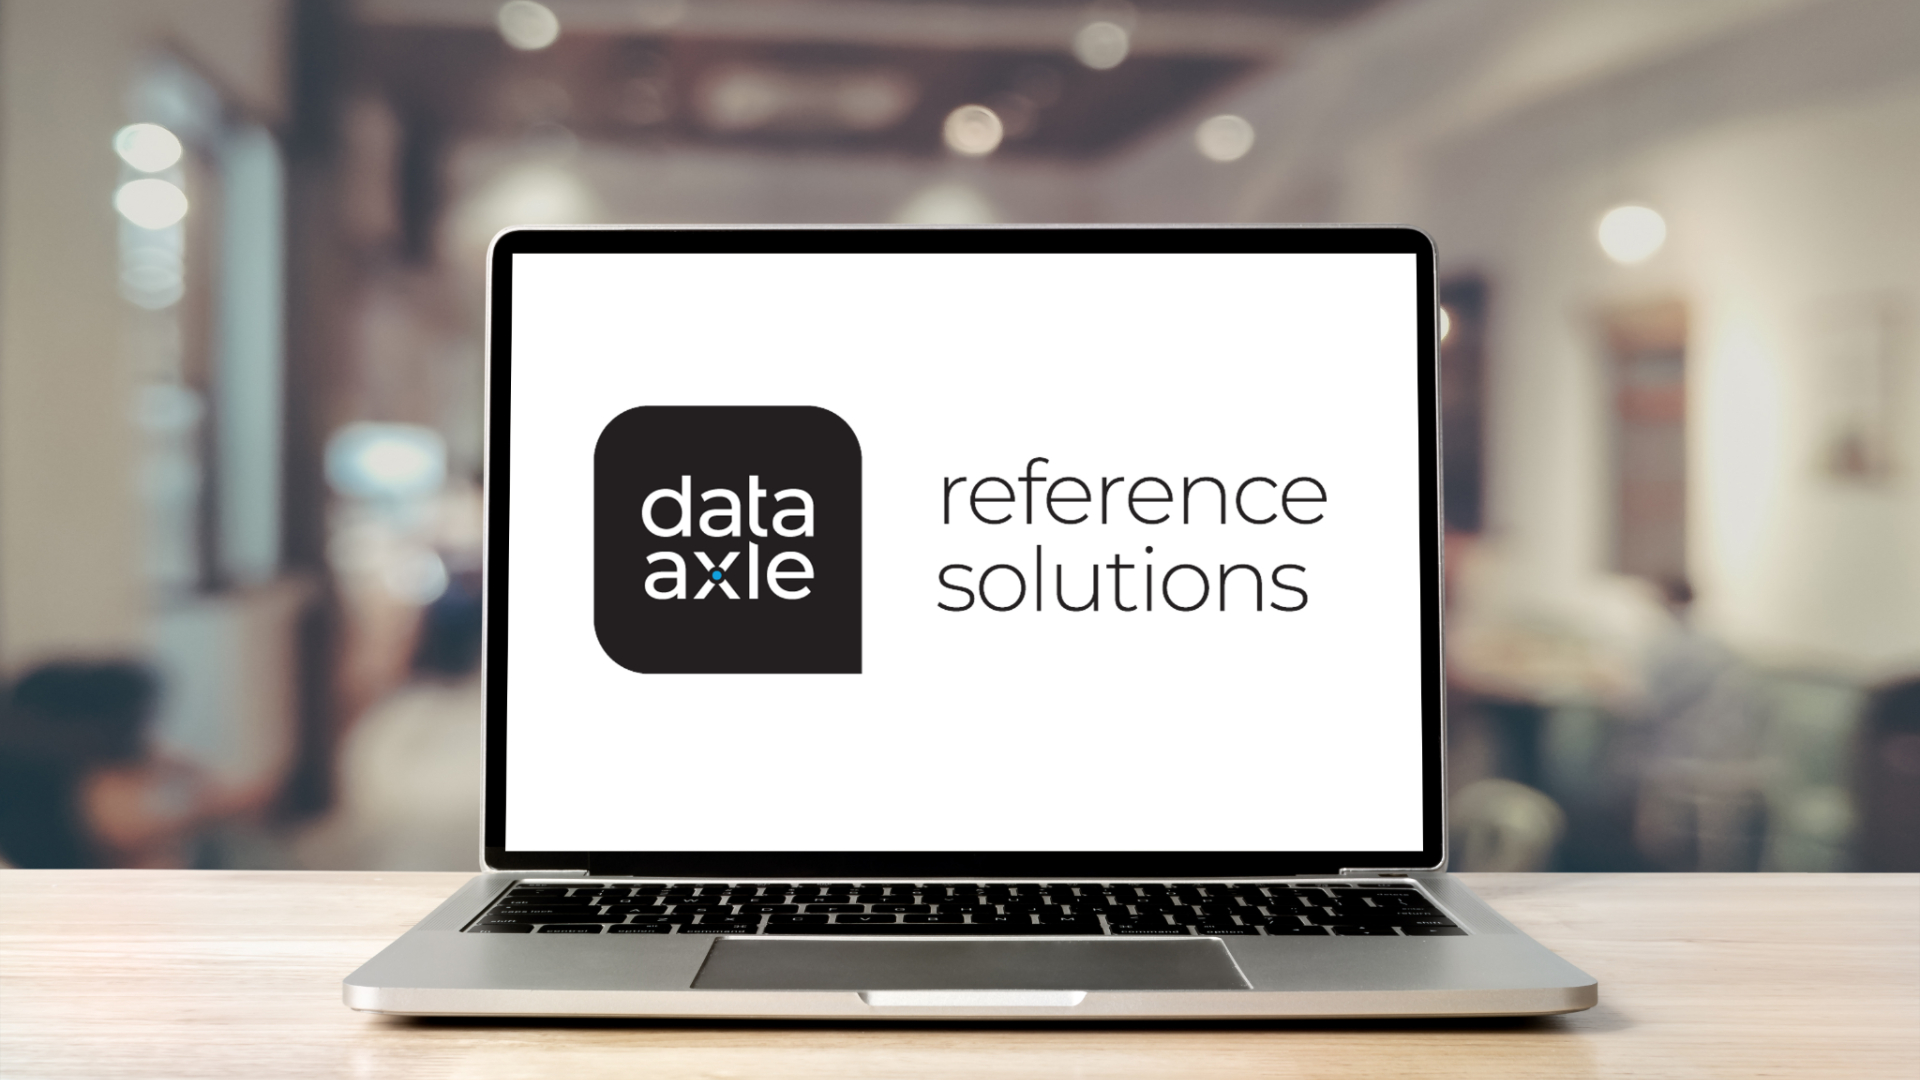 Using Reference Solutions